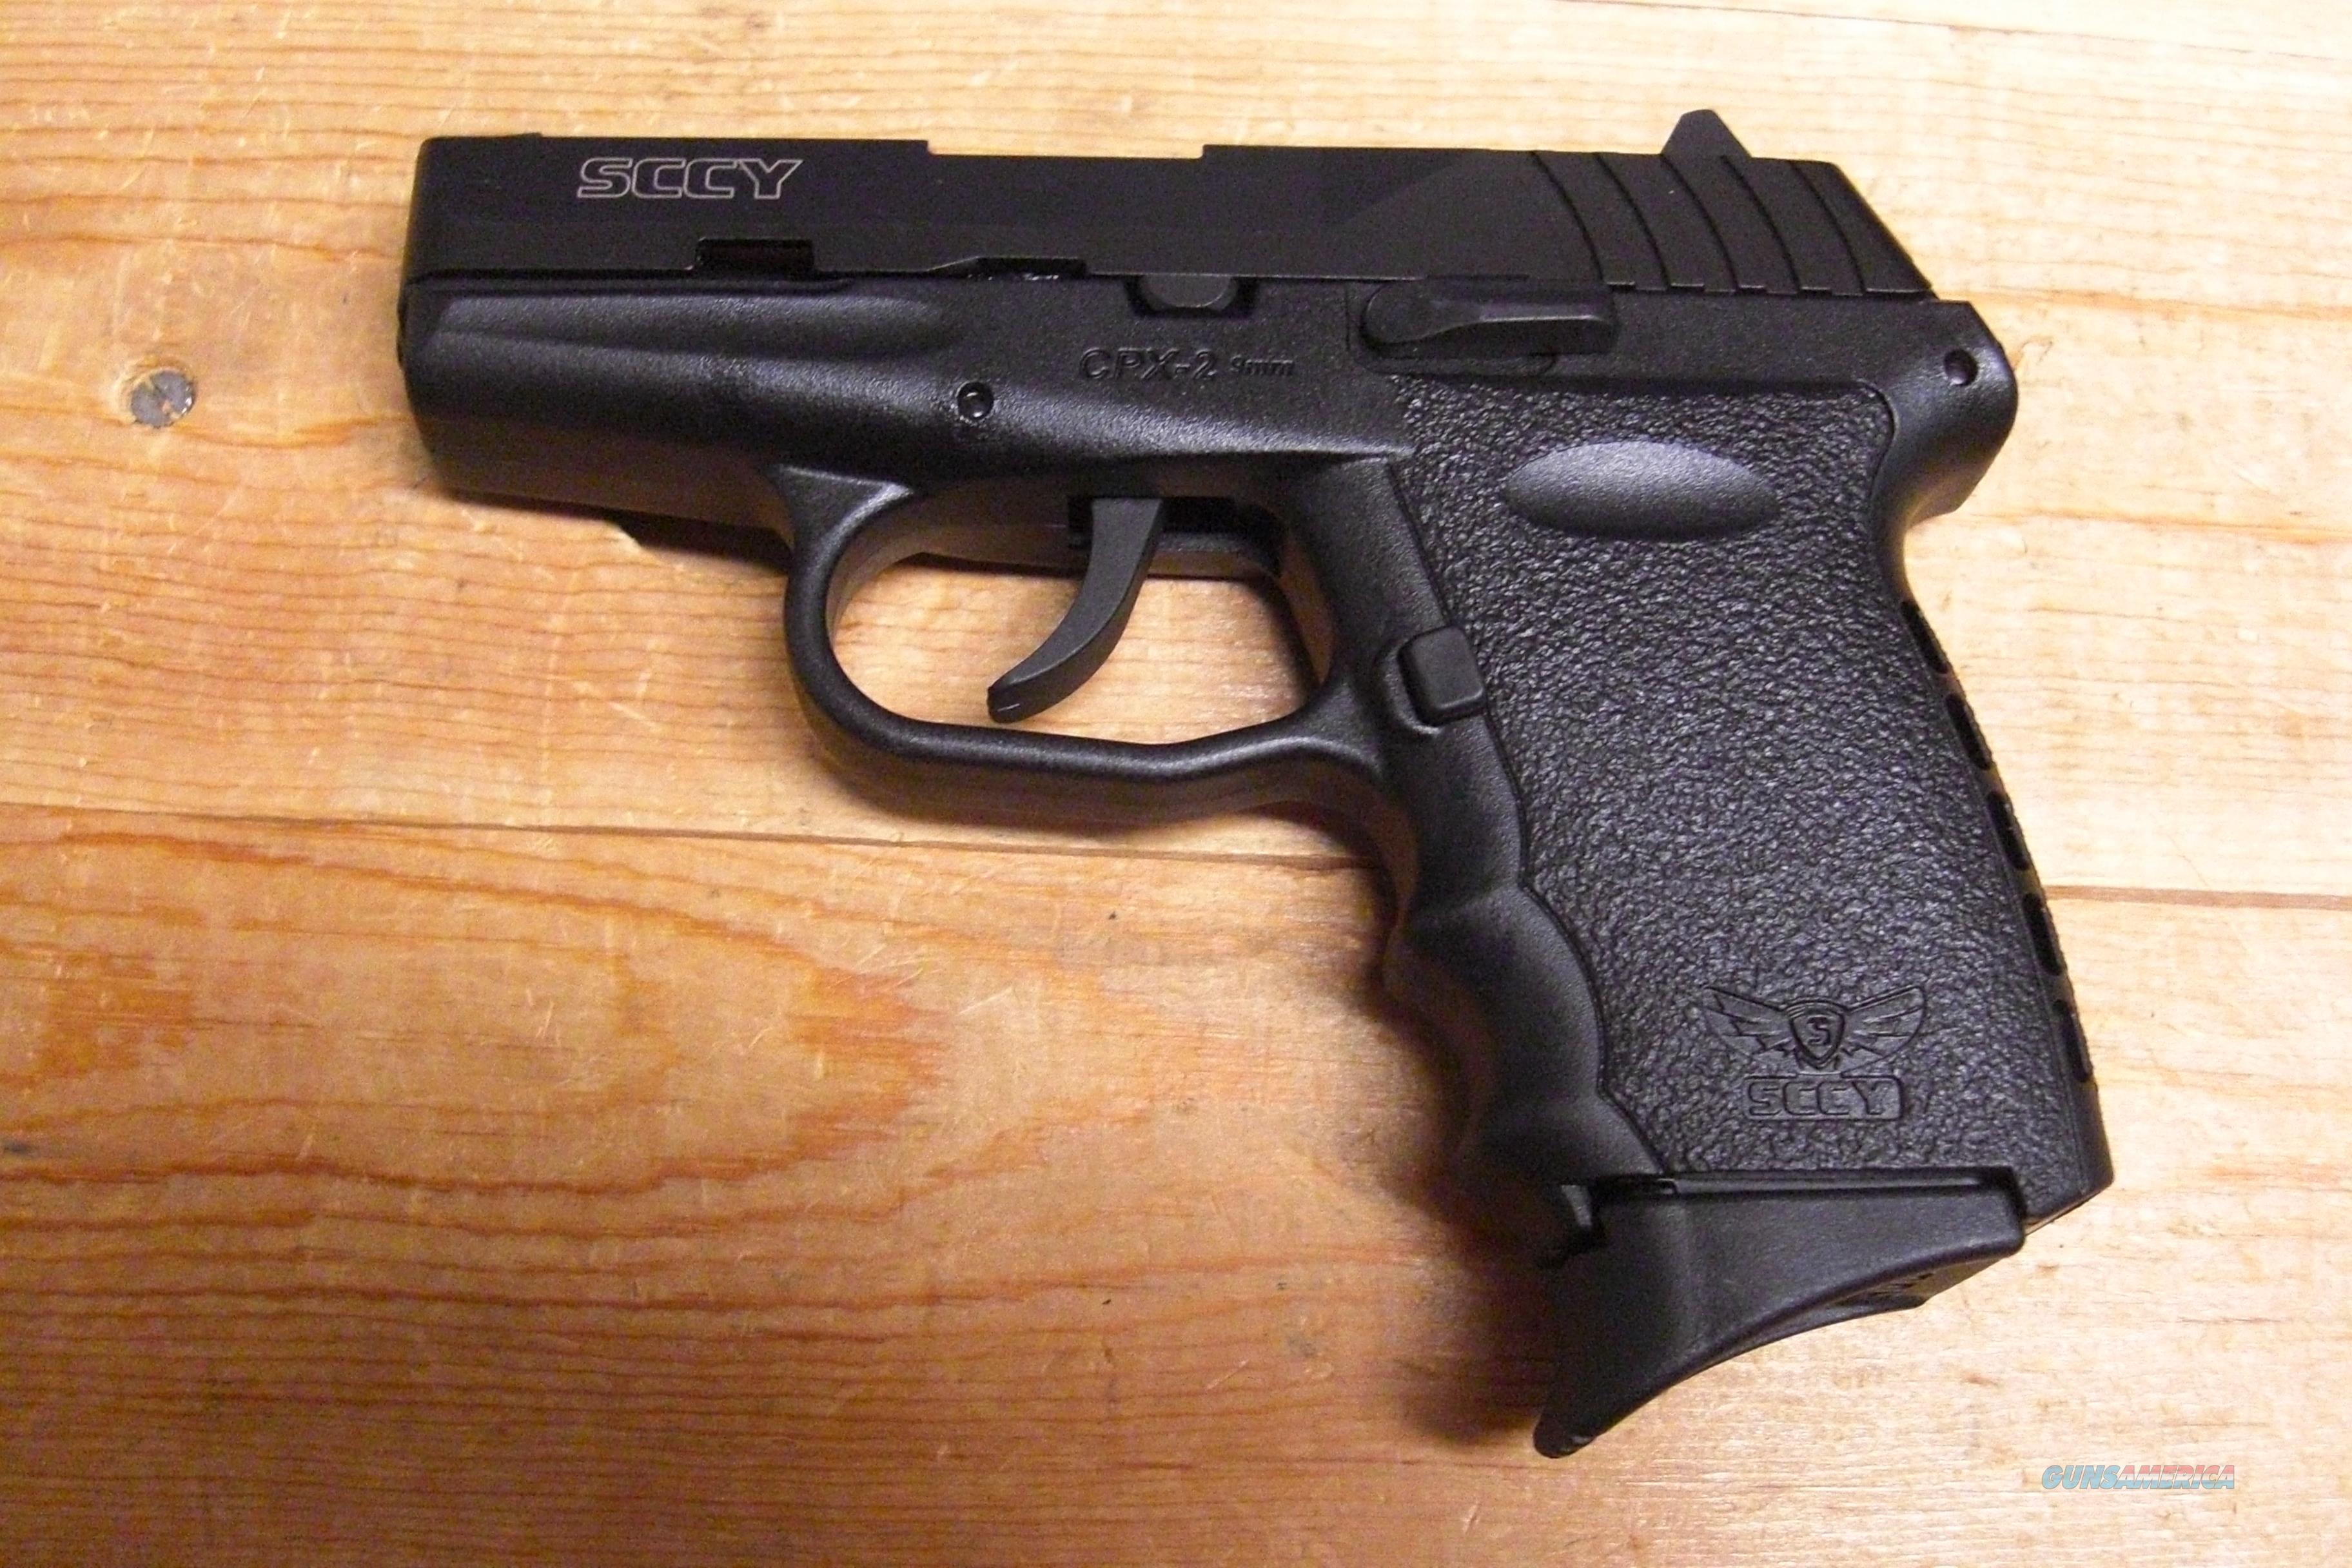 This new SCCY CPX-2 pistol fires the 9mm round. 